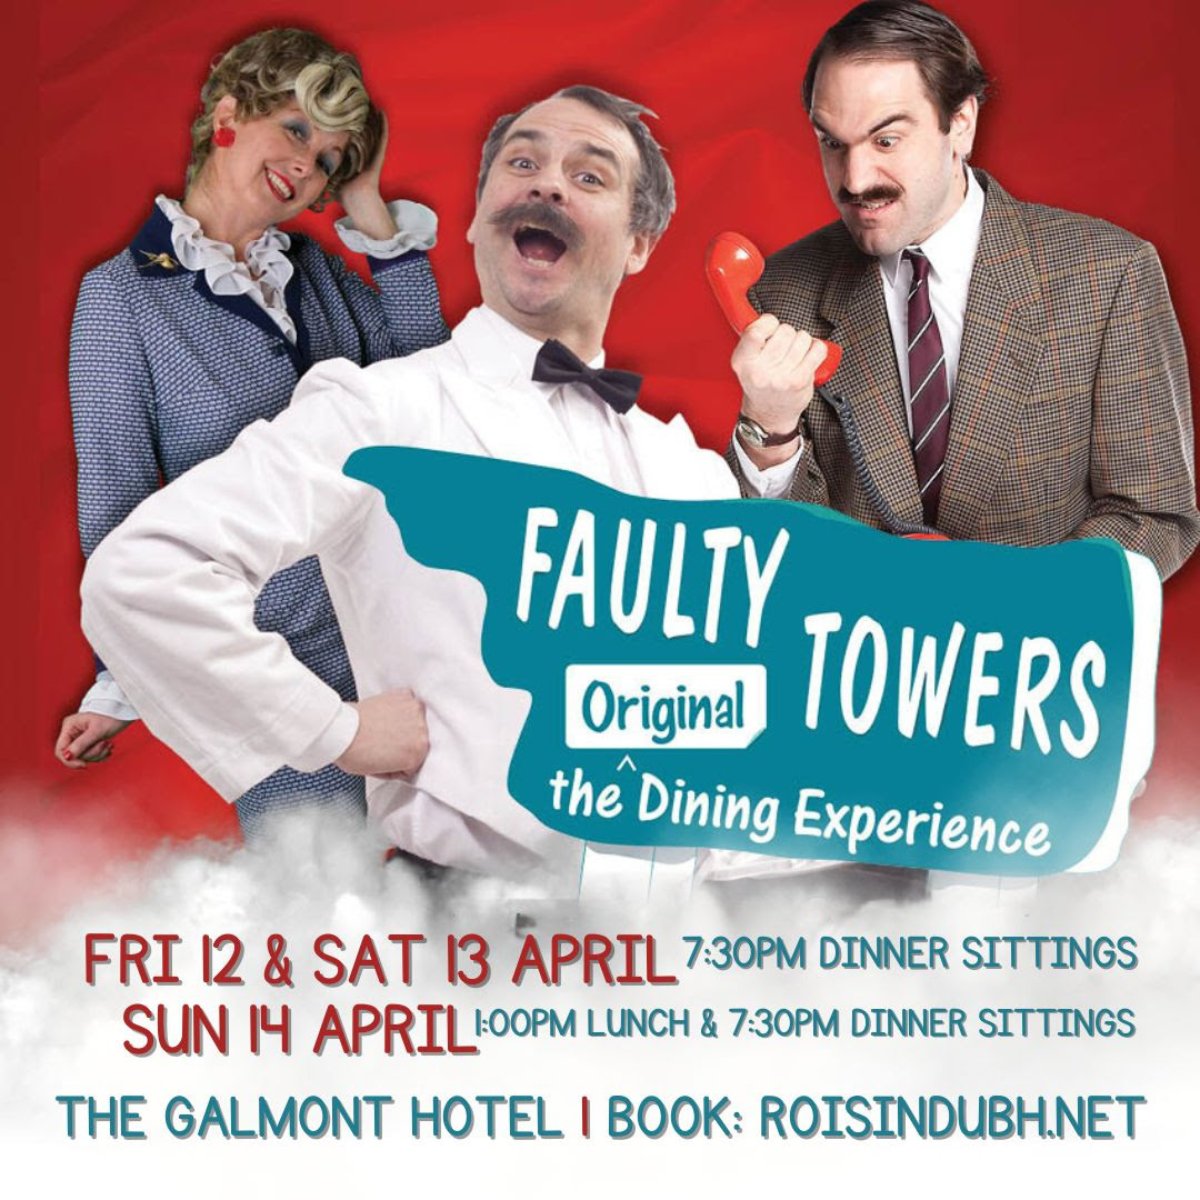 Straight from London’s West End via the legendary Sydney Opera House, this international sensation sold out four days at Galway Comedy Festival in October and is returning to Galway in April hosted here at The Galmont Hotel & Spa. Find out more: thegalmont.com/en/userpage-17…